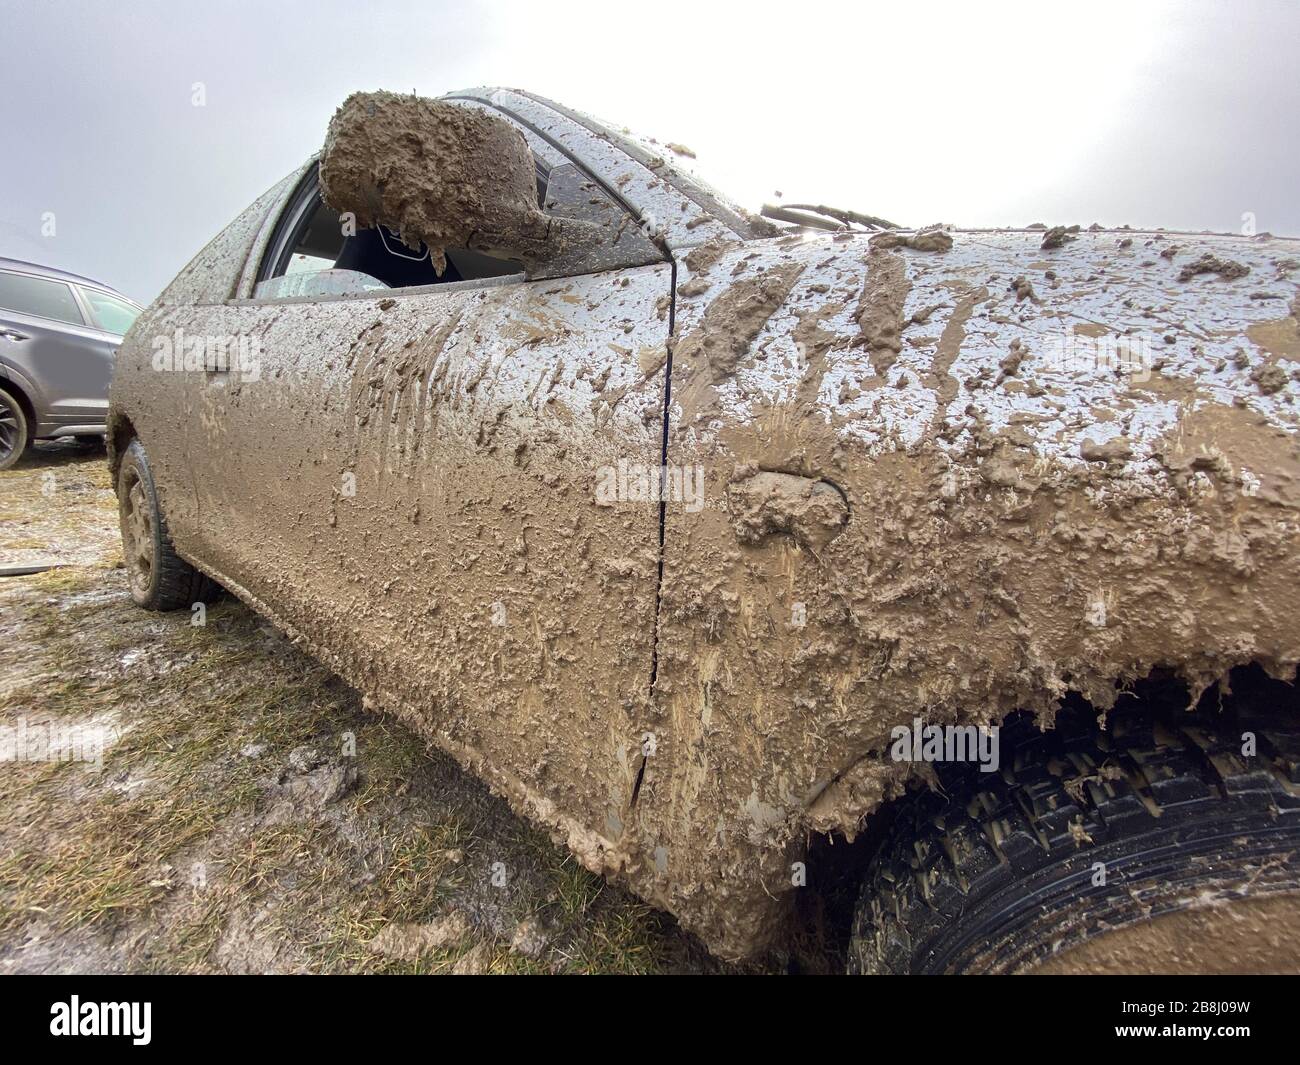 The detail of the car completely dirty by mud after the drag race on a field during winter. It needs complete cleaning of the exterior and interior. Stock Photo